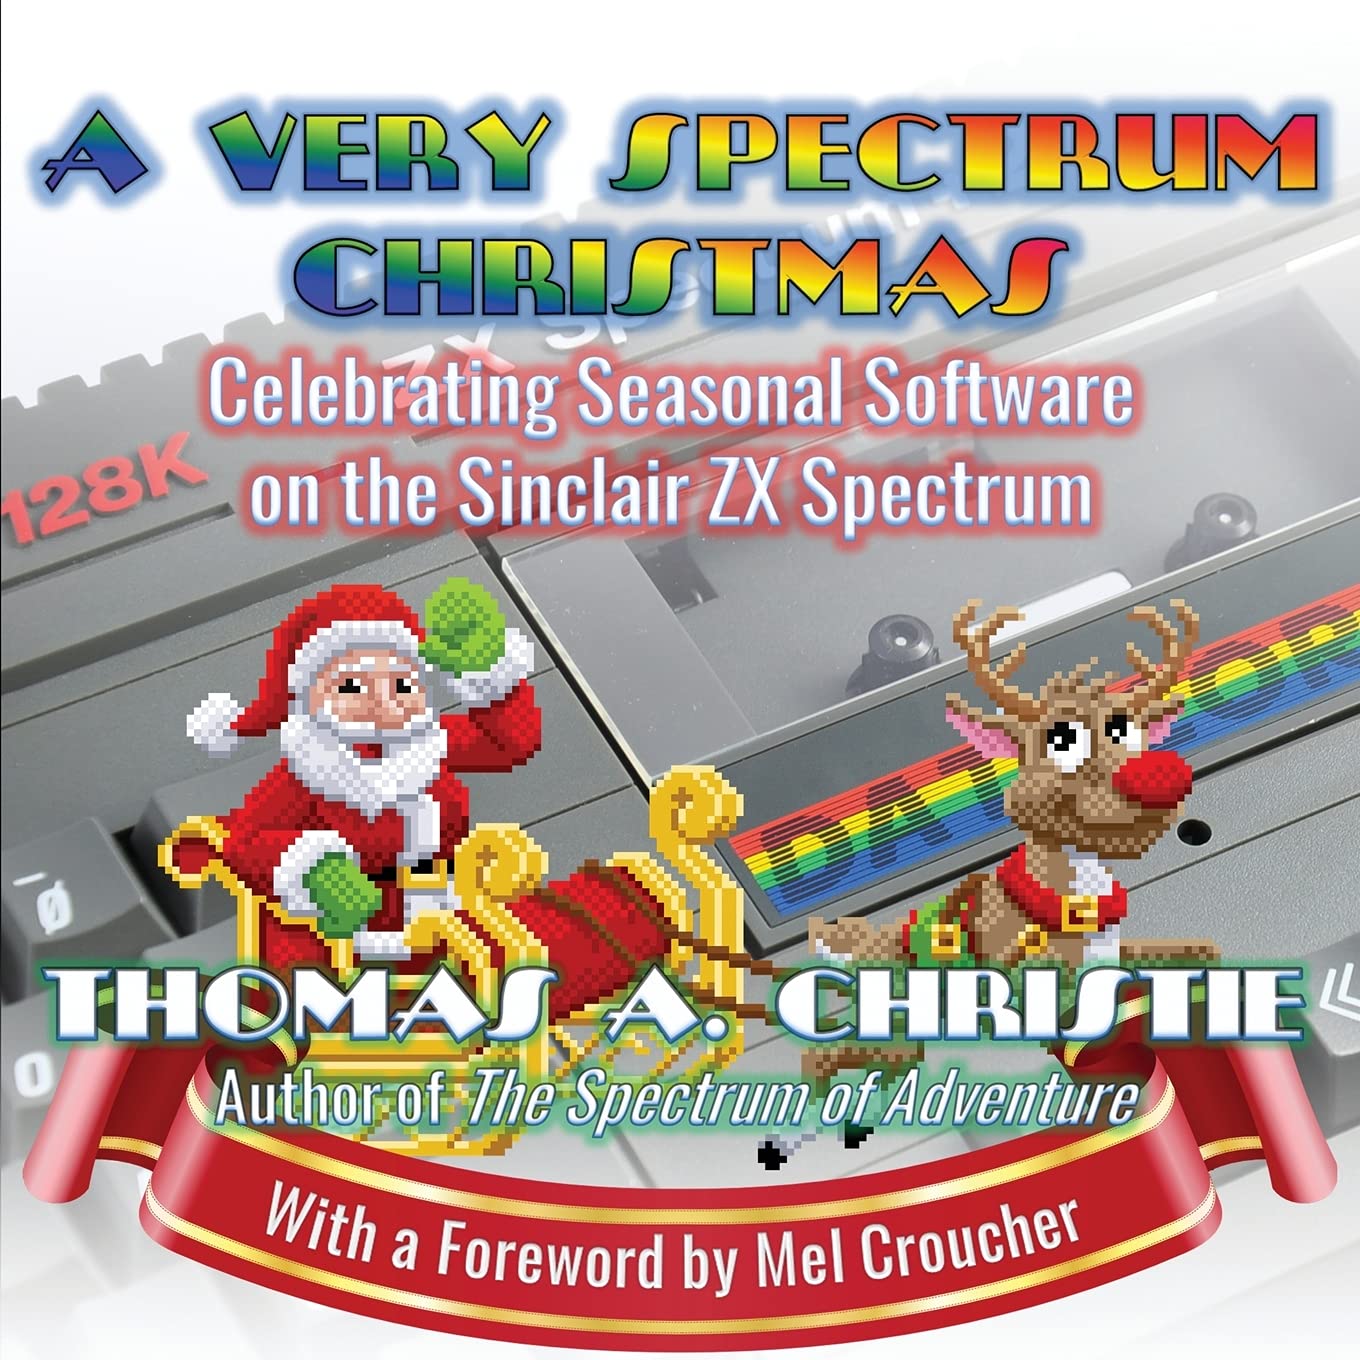 A Very Spectrum Christmas: Celebrating Seasonal Software on the Sinclair ZX Spectrum image, screenshot or loading screen